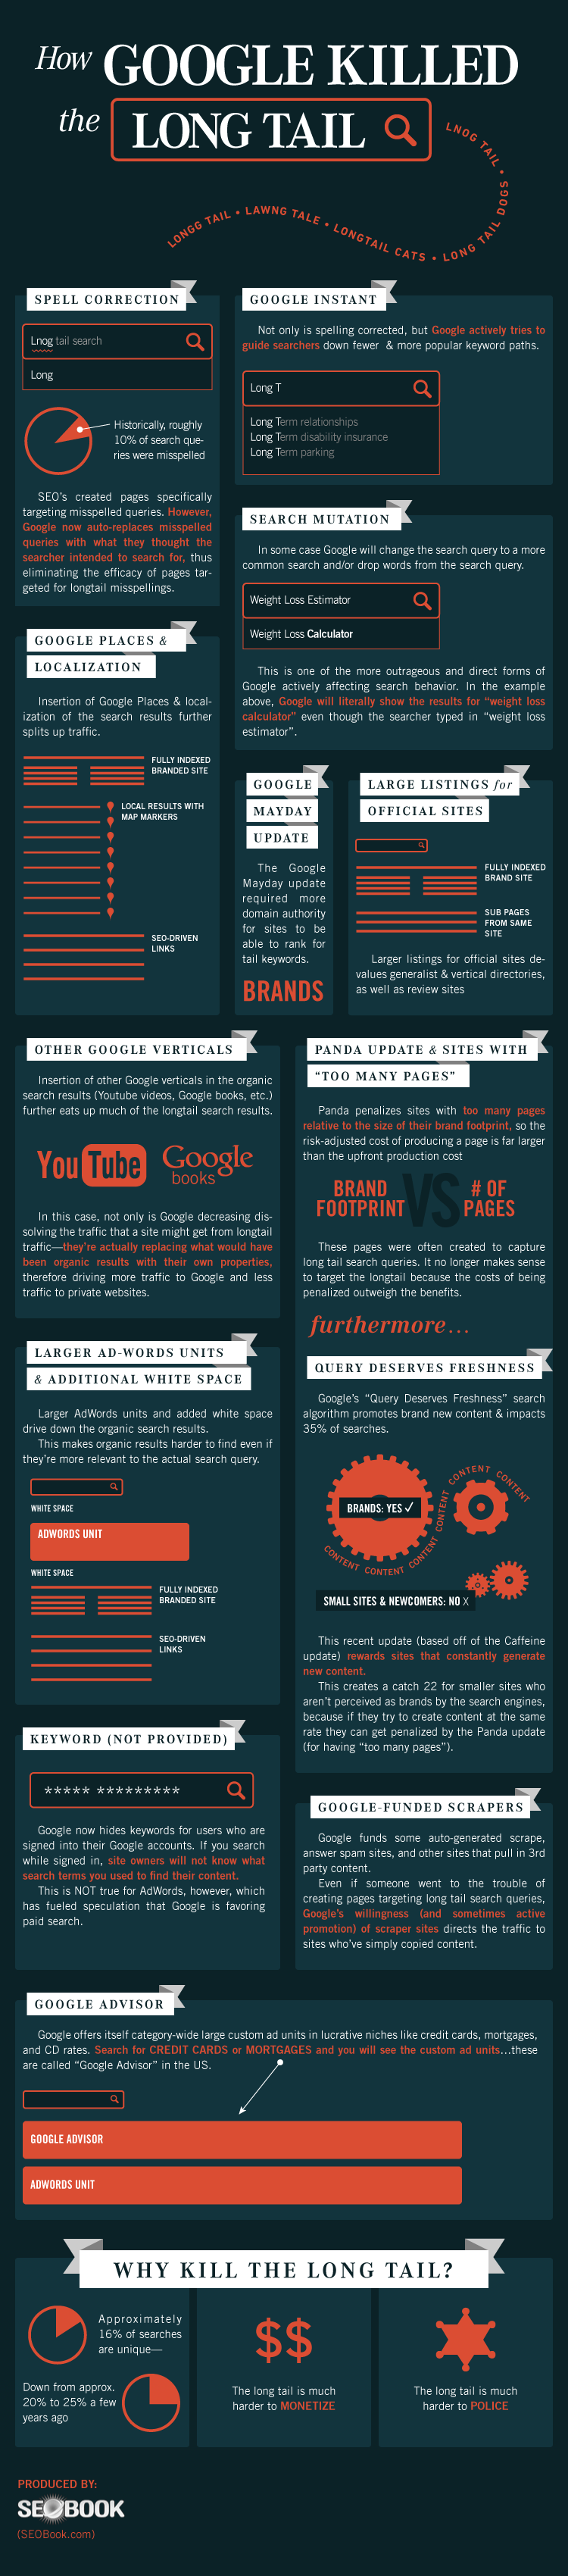 How Google Killed the Long Tail Keyword SEO (Infographic)